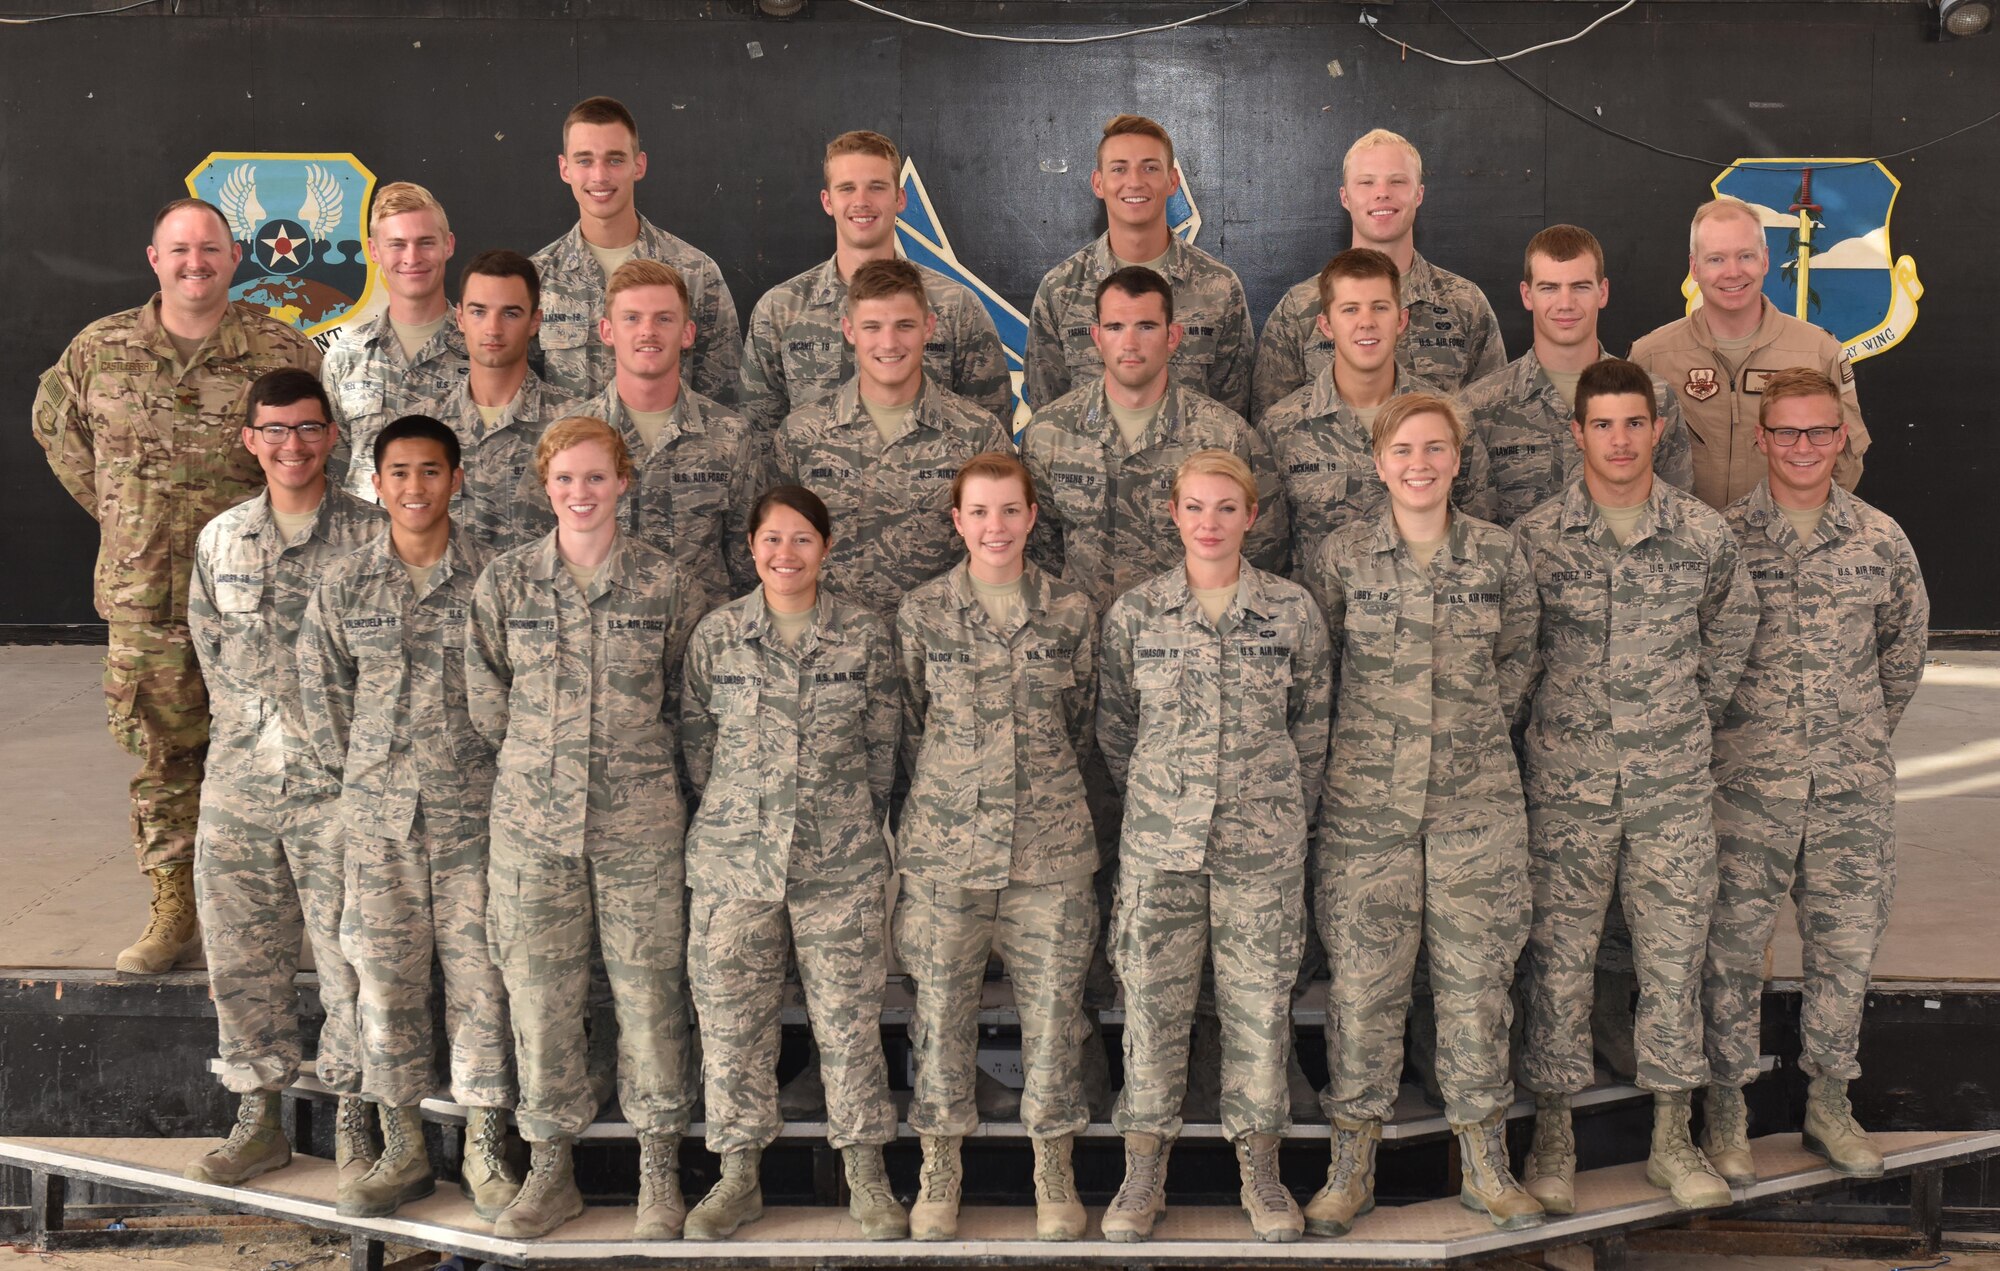 Maj. Jason Castleberry (left), Lt. Col. David Meier (right), and 20 U.S. Air Force Academy cadets pose for a photo at an undisclosed location in southwest Asia, July 7, 2017. Cadets visited the 380th Air Expeditionary Wing and embedded with multiple units across the installation to see firsthand how separate elements of the mission fit into the whole. (U.S. Air Force photo by Staff Sgt. Marjorie A. Bowlden)